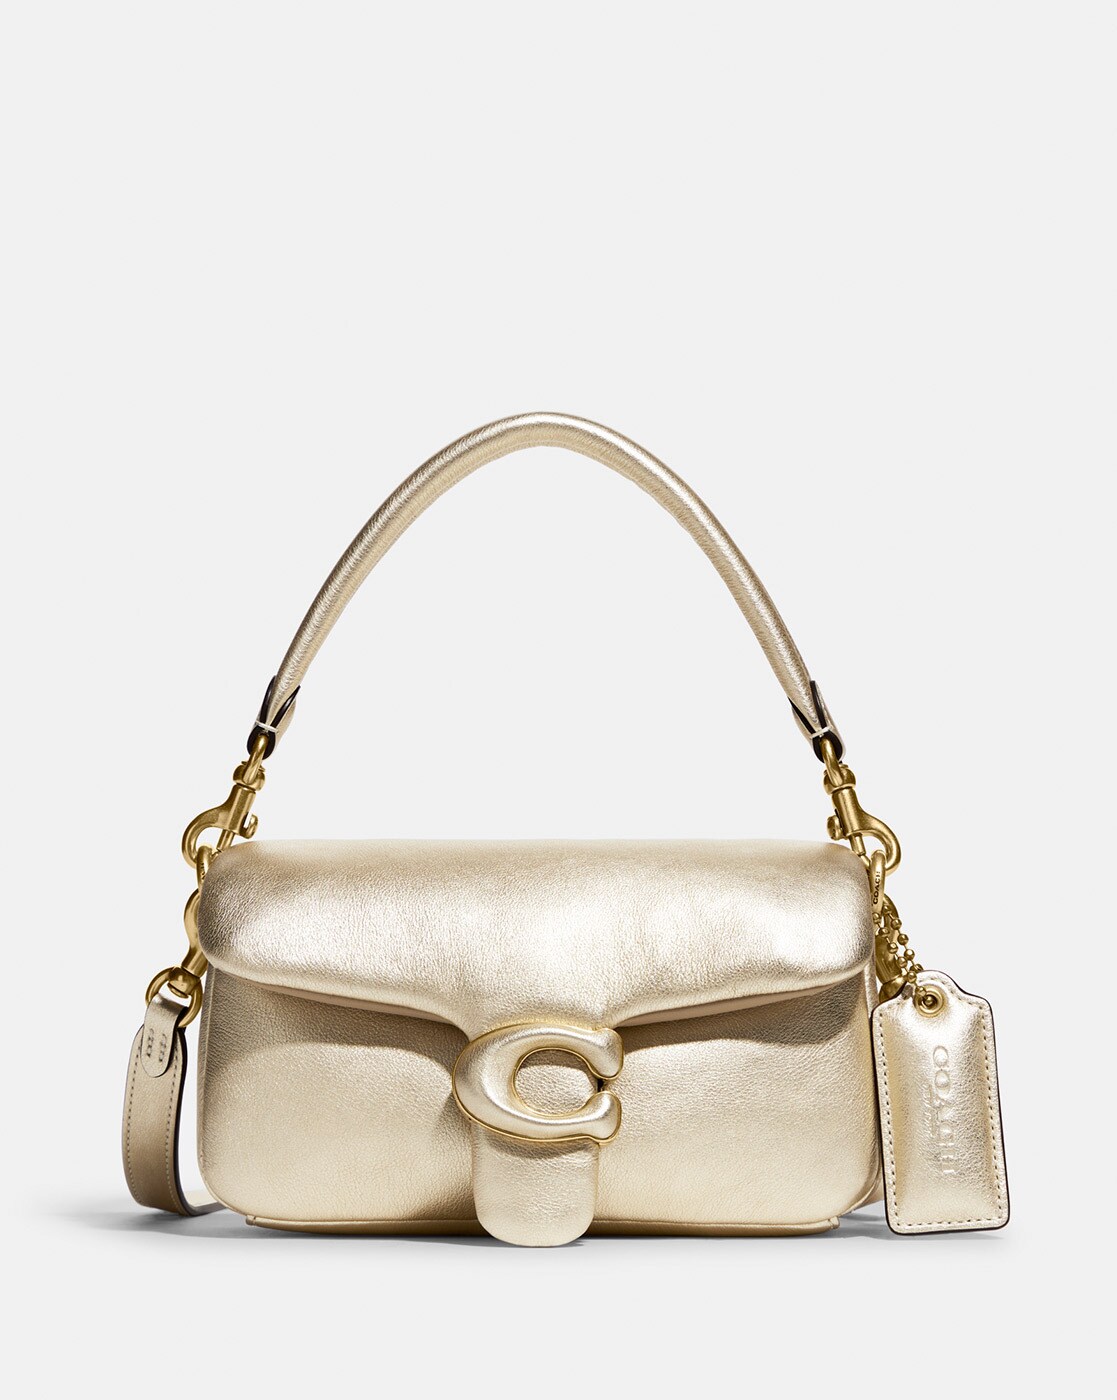 Coach 14562 Gold and Tan Poppy Shoulder Bag